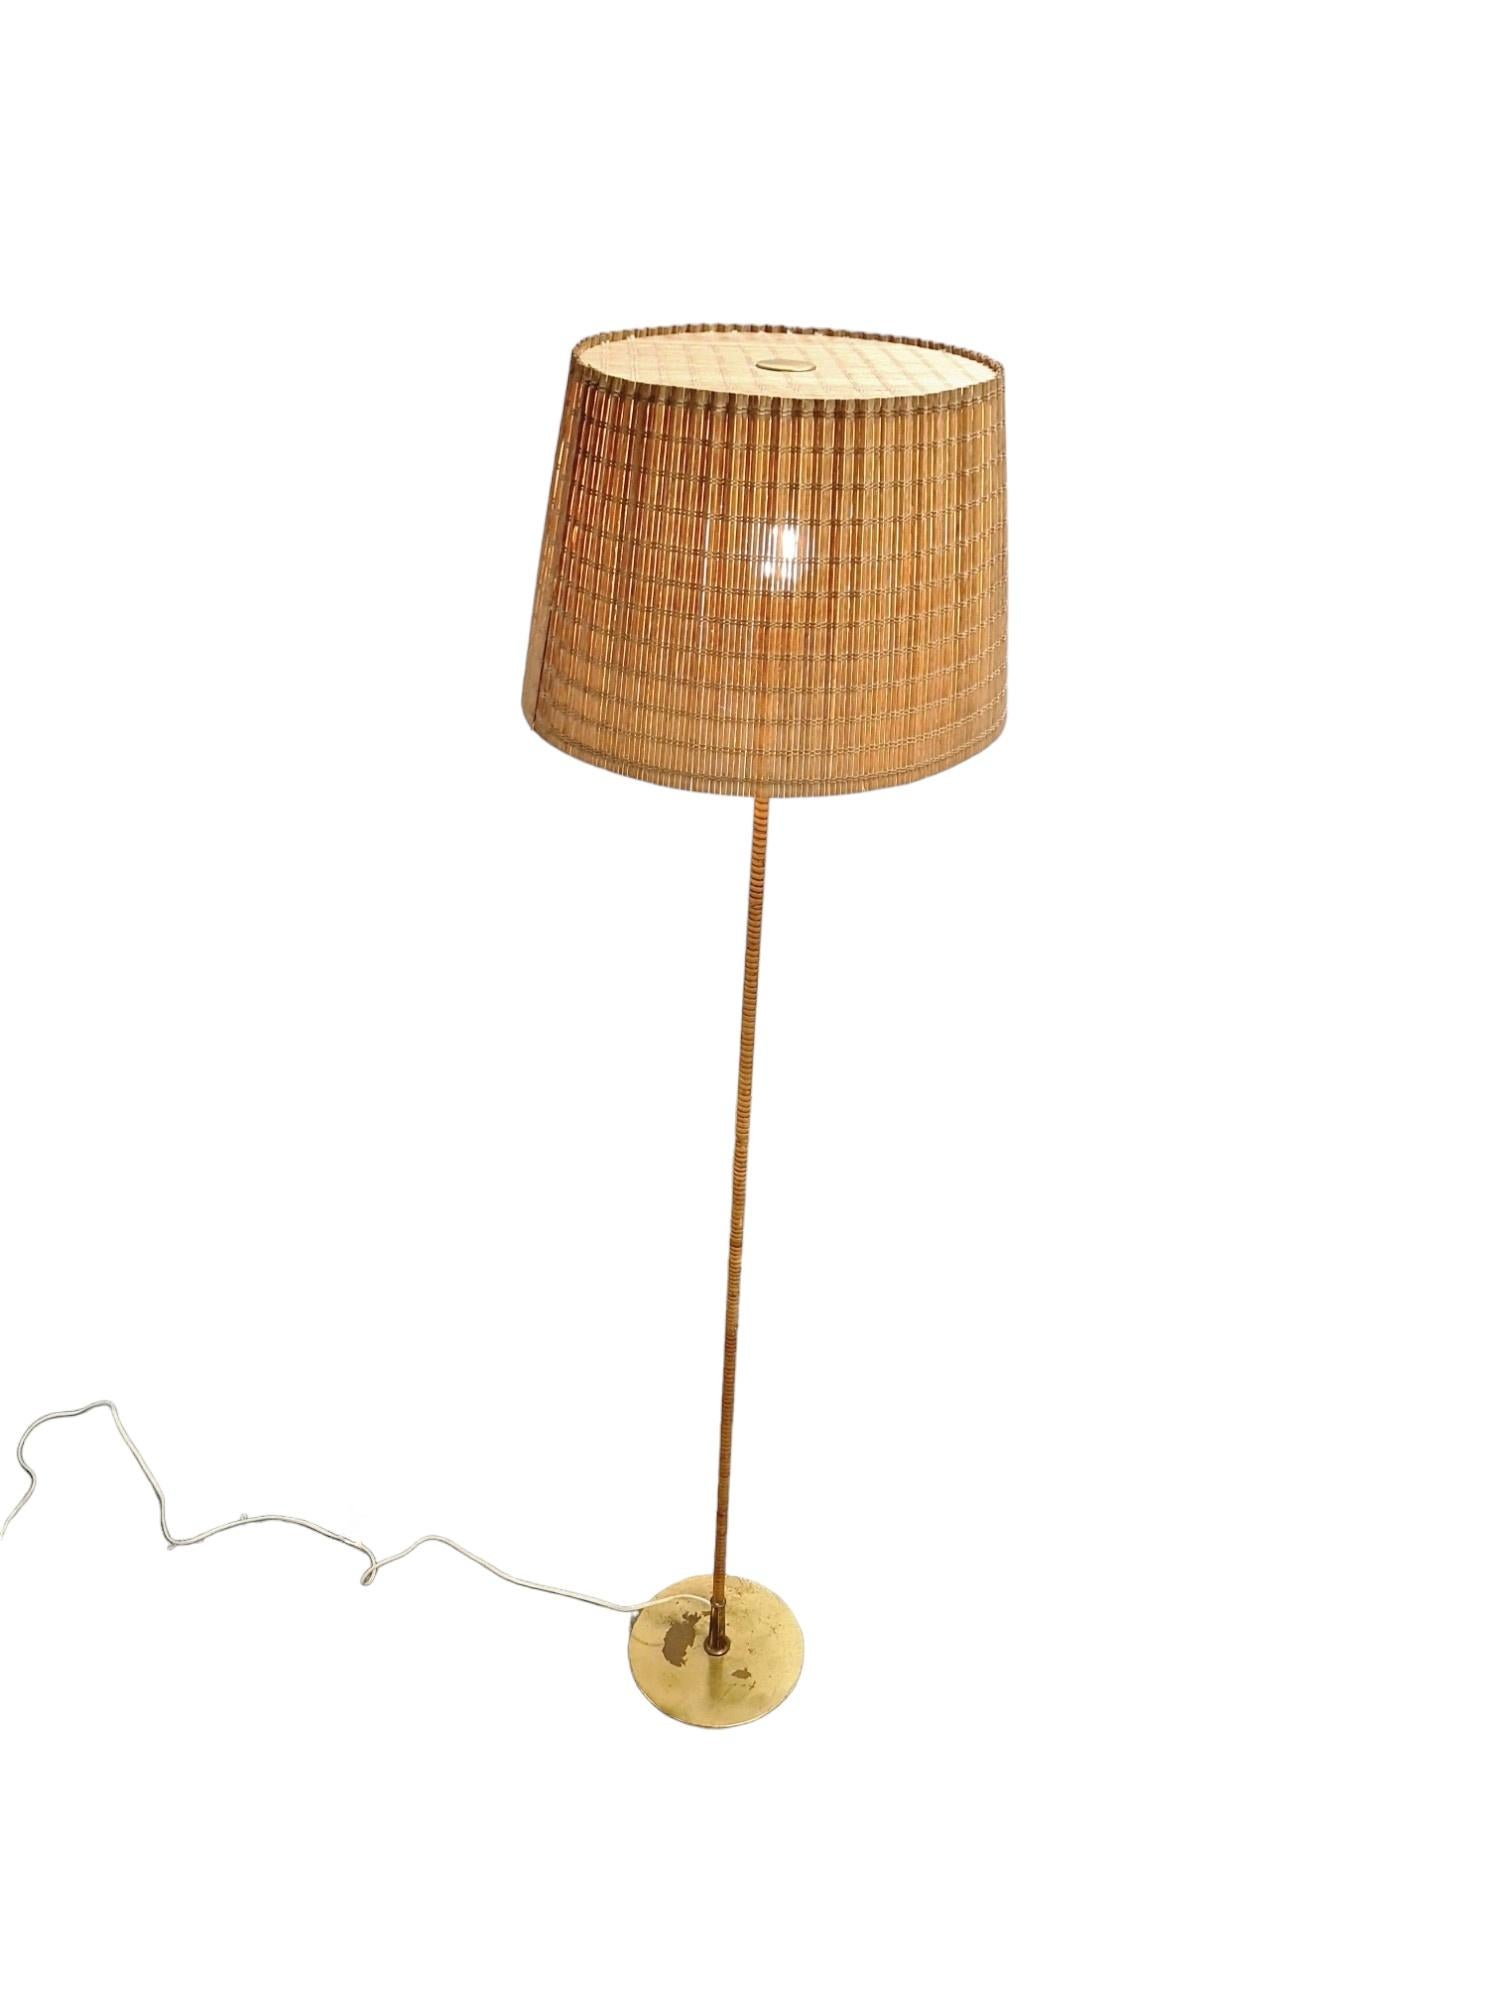 Paavo Tynell Floor Lamp Model 9627, Taito Oy  For Sale 2